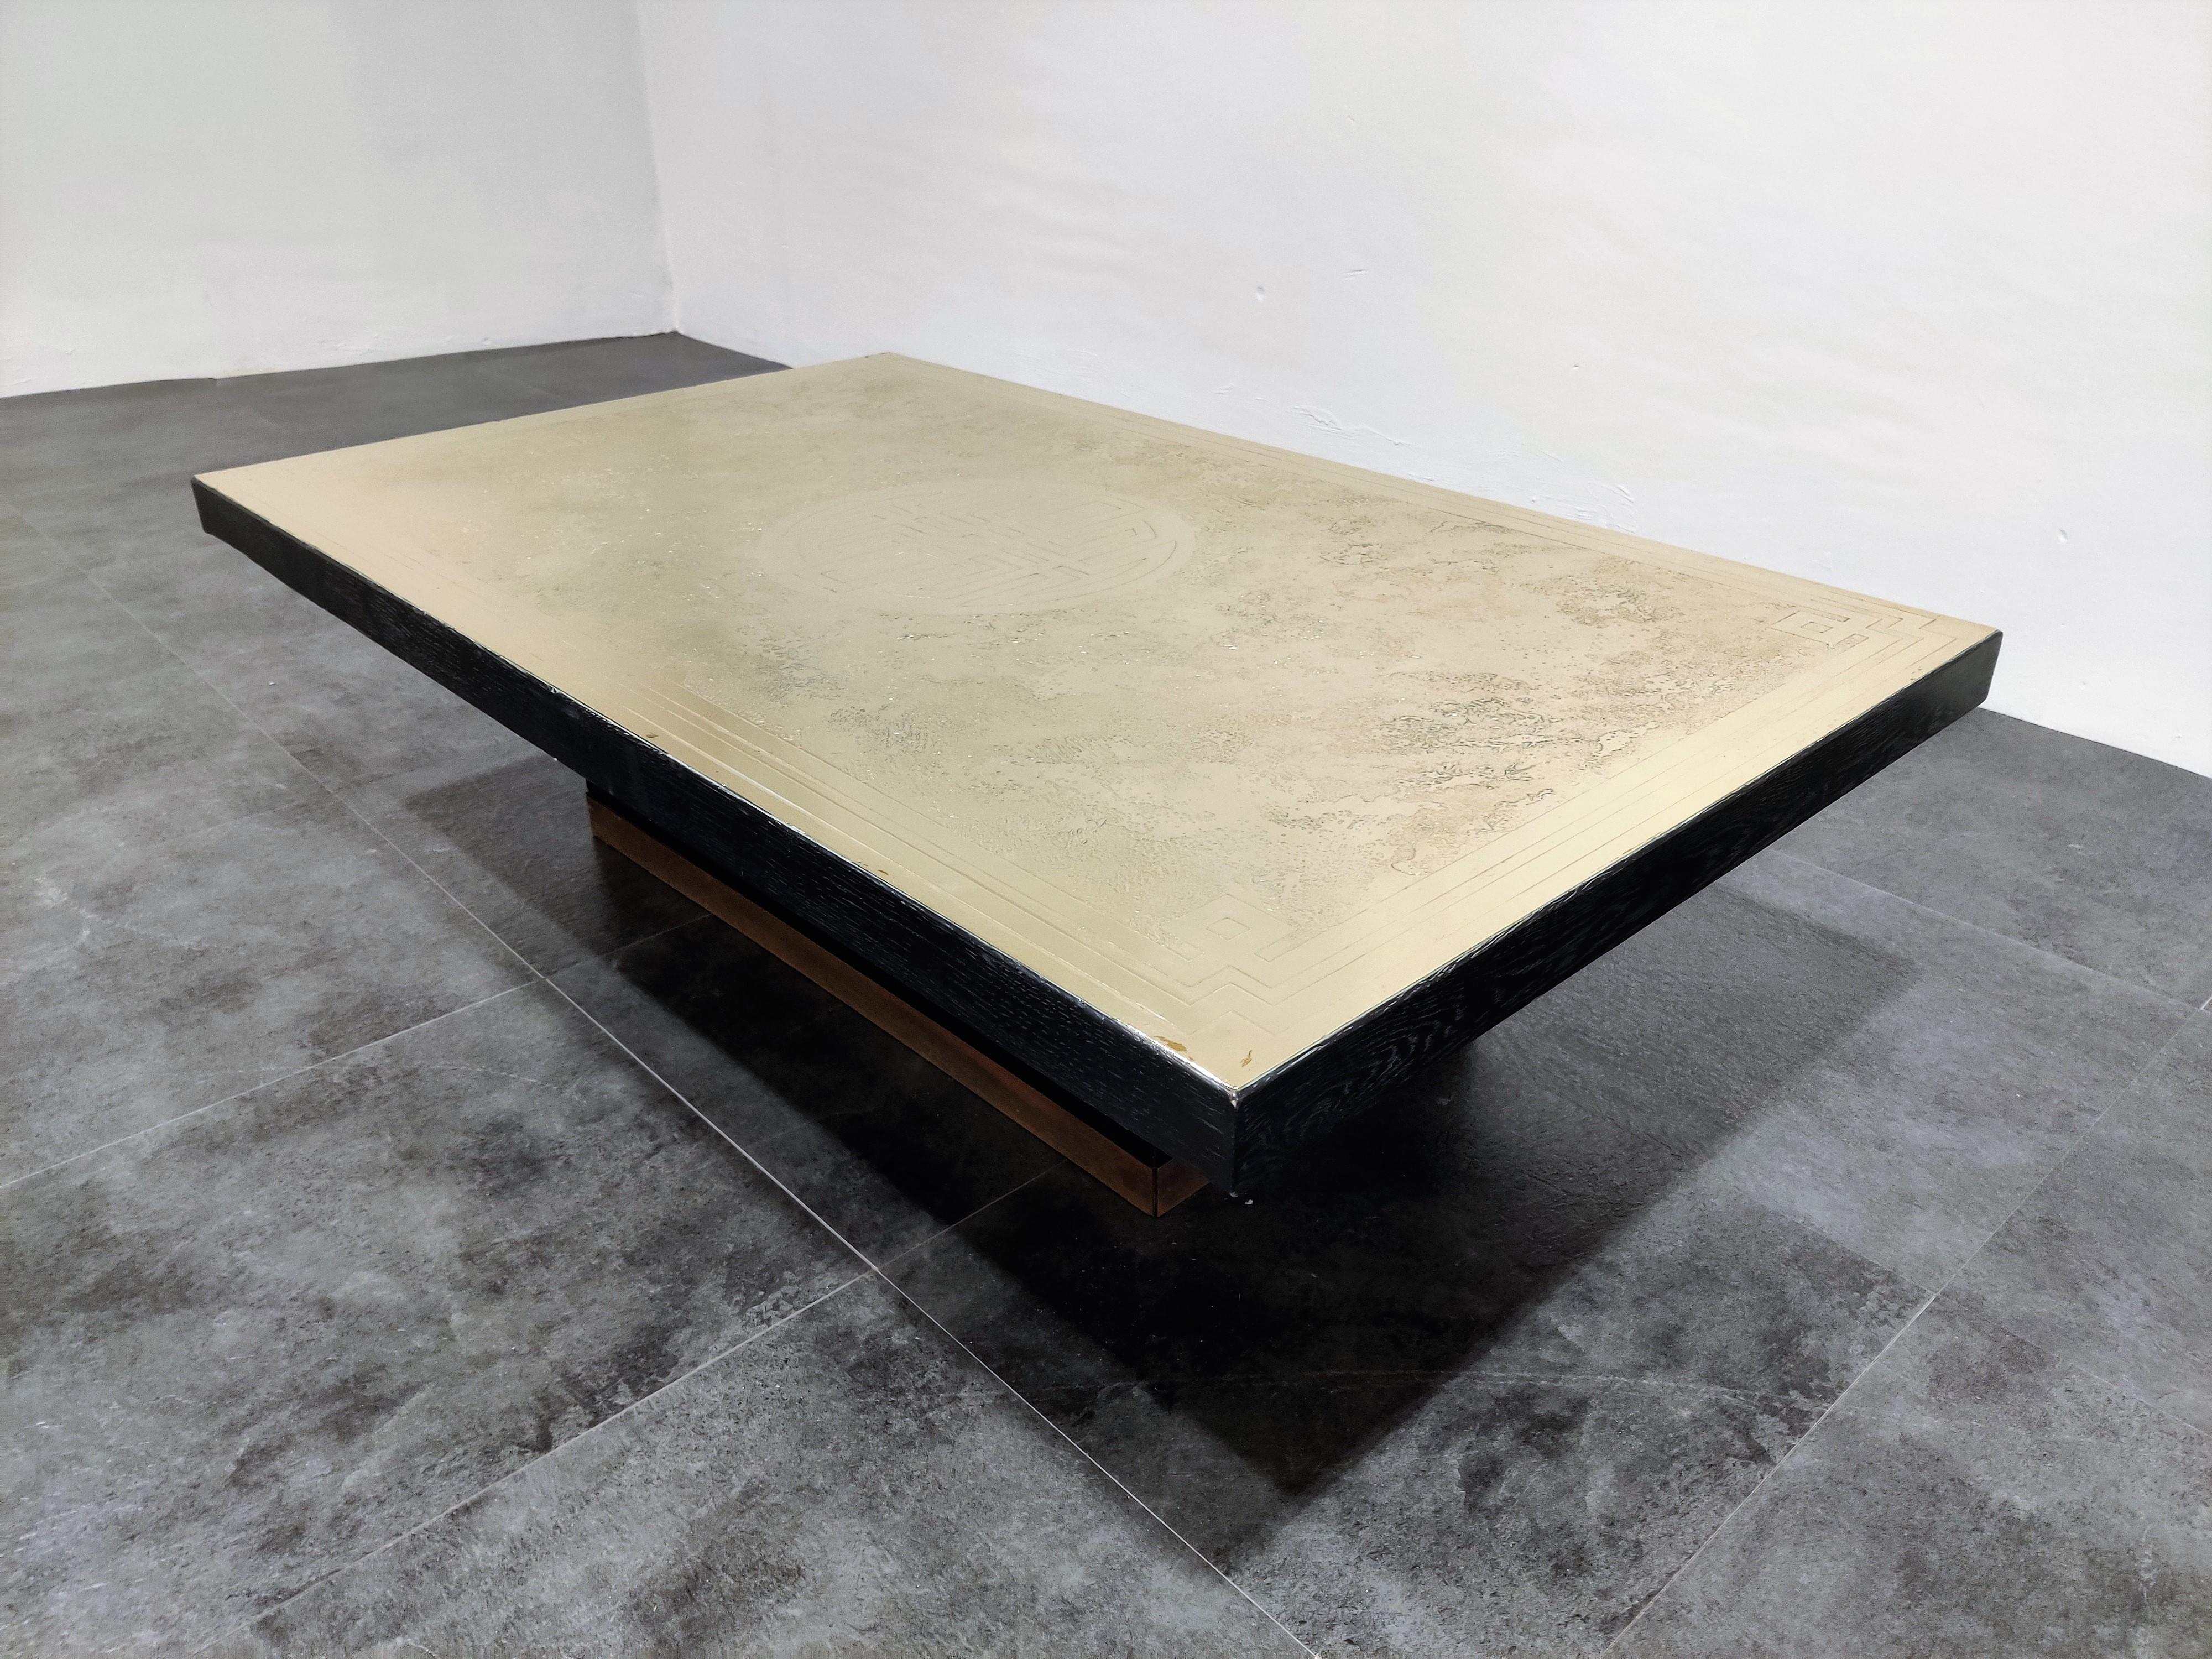 Rectangular coffee table with a brass etched top by Albert Verneuil mounted on a black lacquered wooden base.

Signed by the artist.

Beautiful and rare piece very much like the tables from other artists like Fernand Dresse, Georges Mathias,